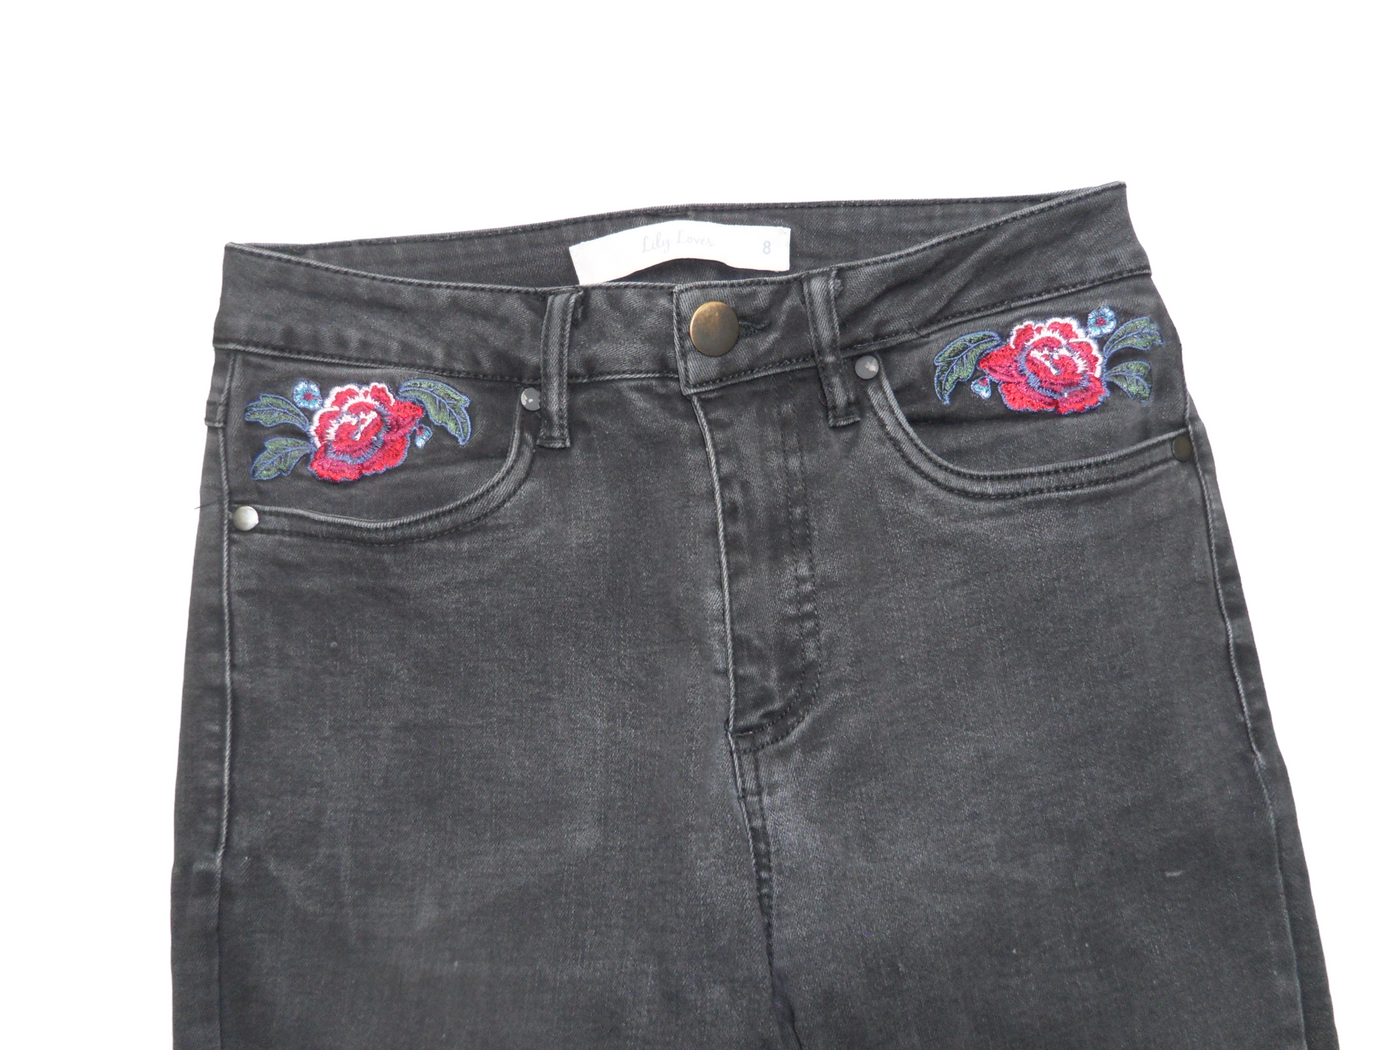 Vintage Lily Loves Women’s Size 8 Black Skinny fit cropped Jeans